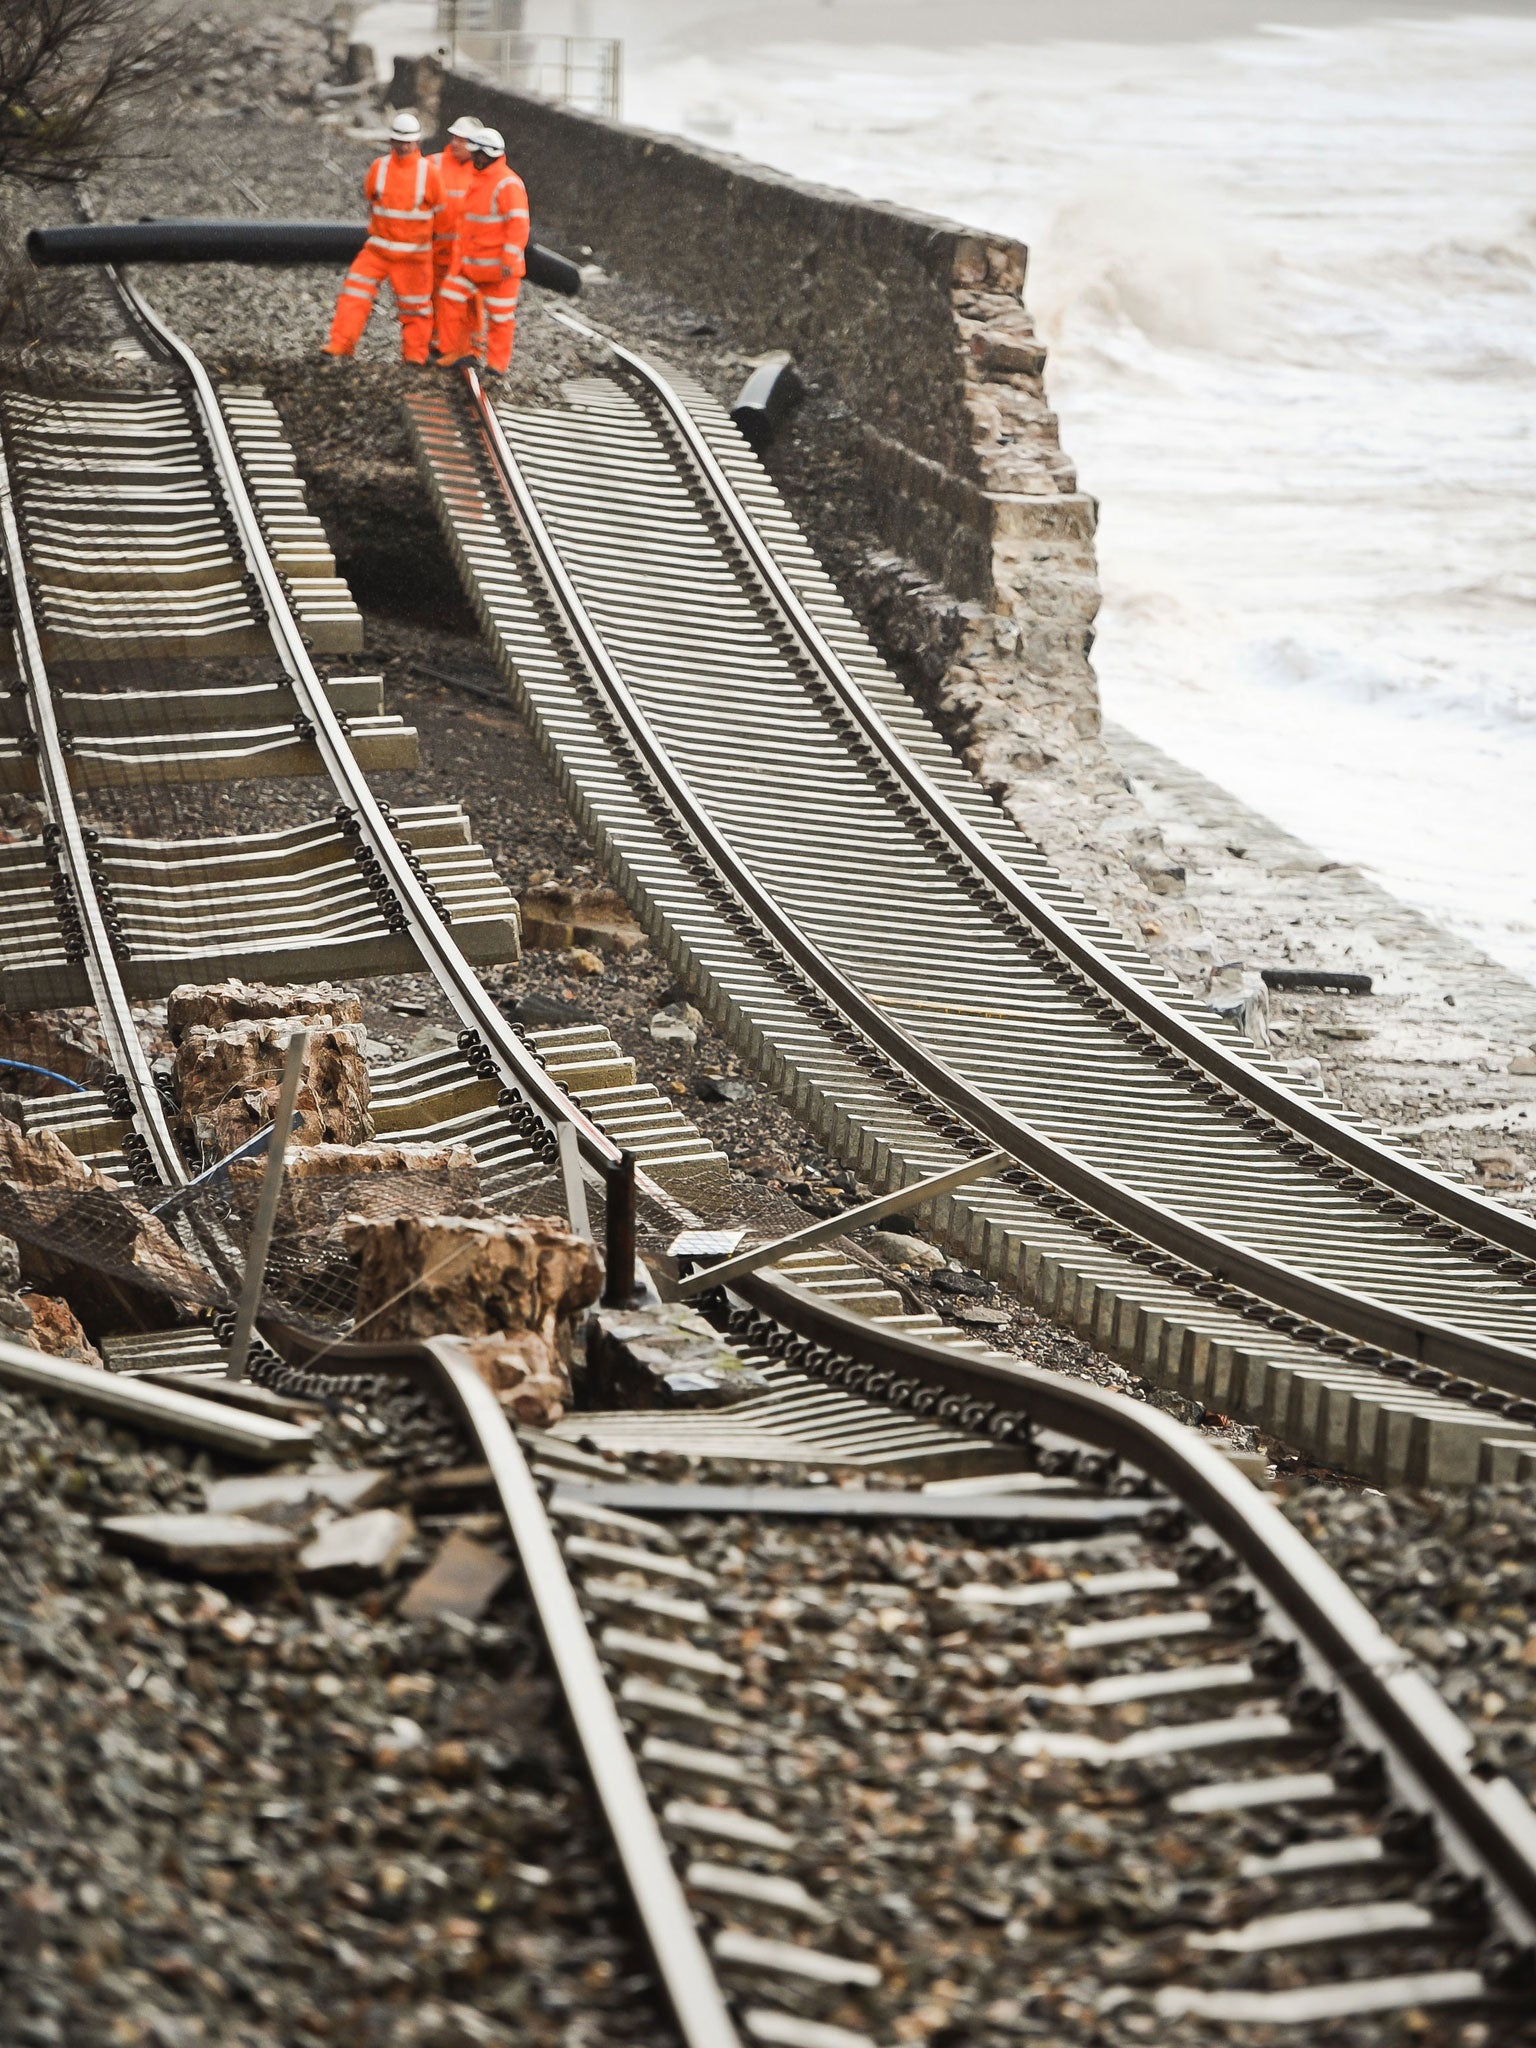 The railway line in Dawlish, Devon, will not be repaired until mid-April